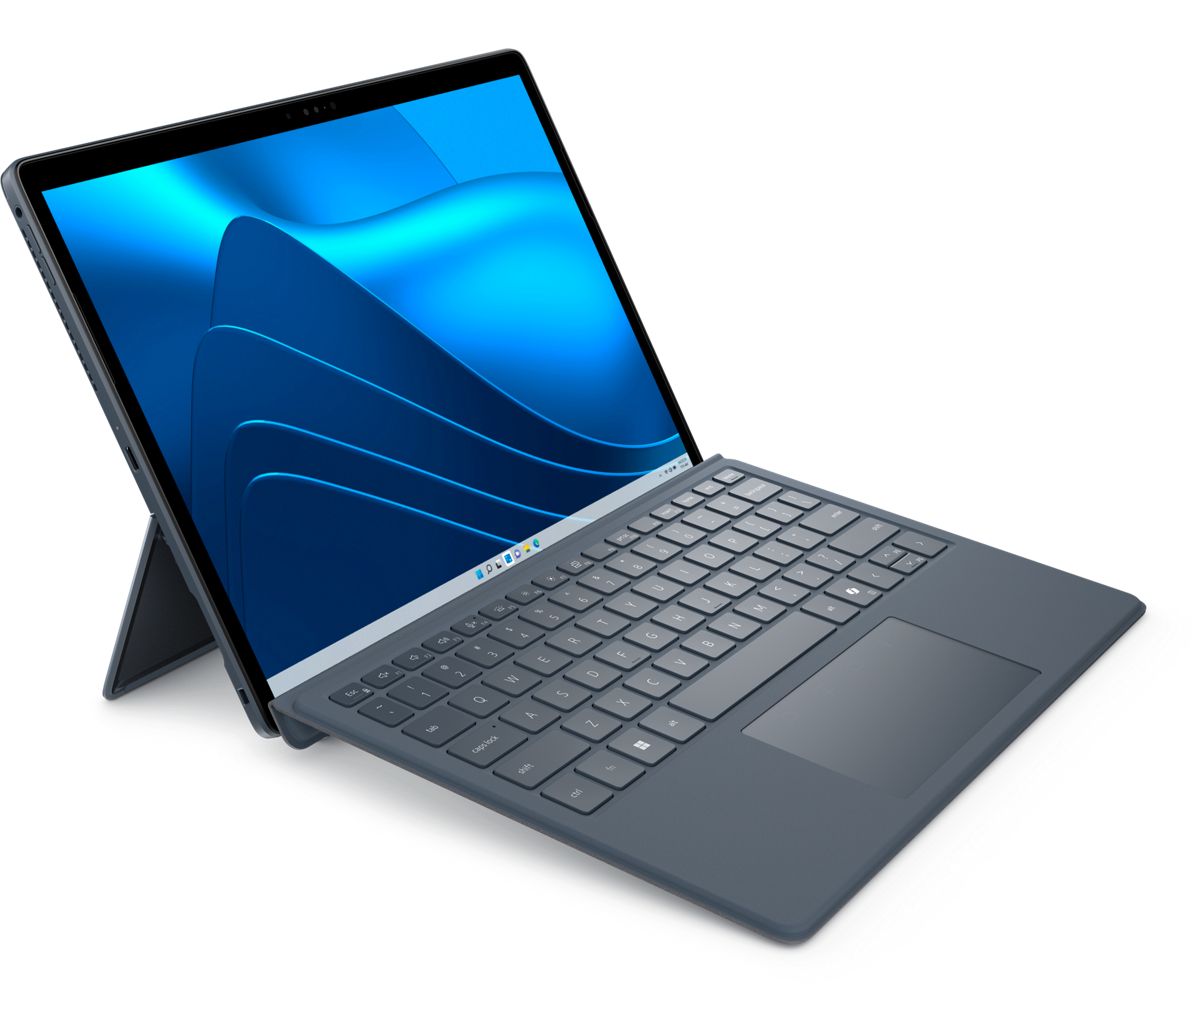 Dell Latitude 7350 Detachable is a 2-in-1 business tablet with Intel Meteor Lake